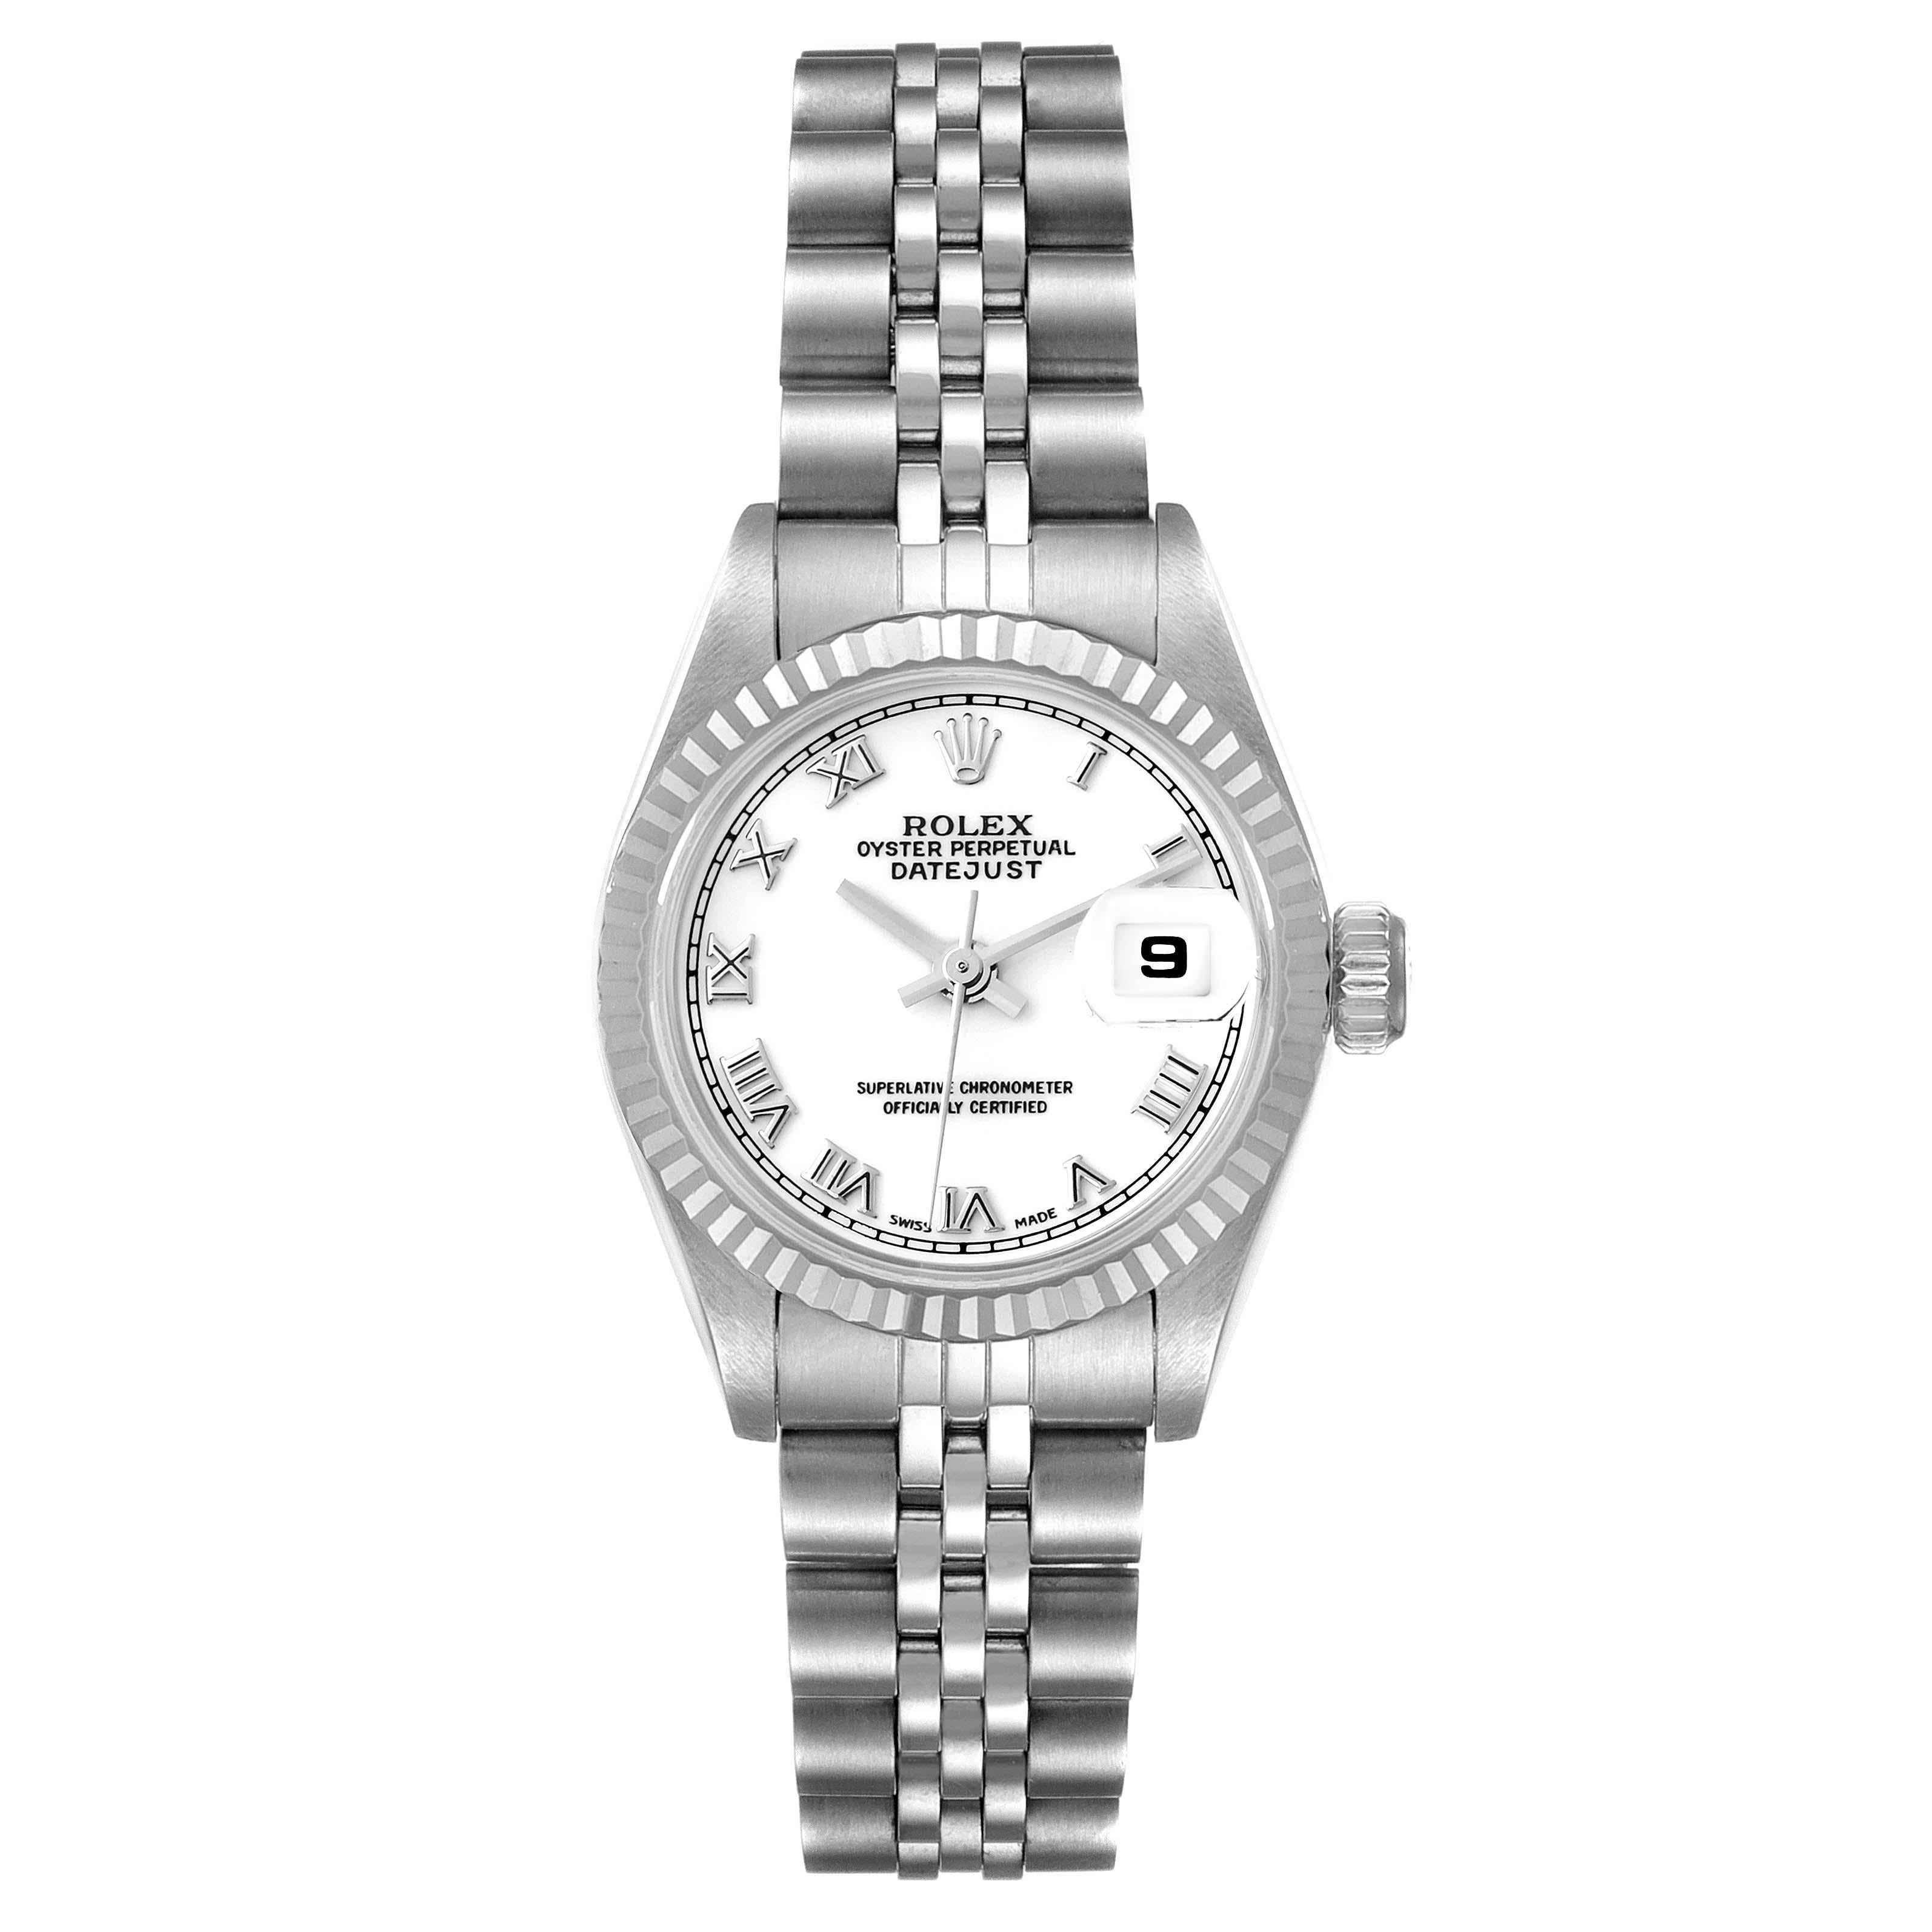 Rolex Datejust Steel White Gold Roman Dial Ladies Watch 69174. Officially certified chronometer automatic self-winding movement. Stainless steel oyster case 26 mm in diameter. Rolex logo on the crown. 18k white gold fluted bezel. Scratch resistant